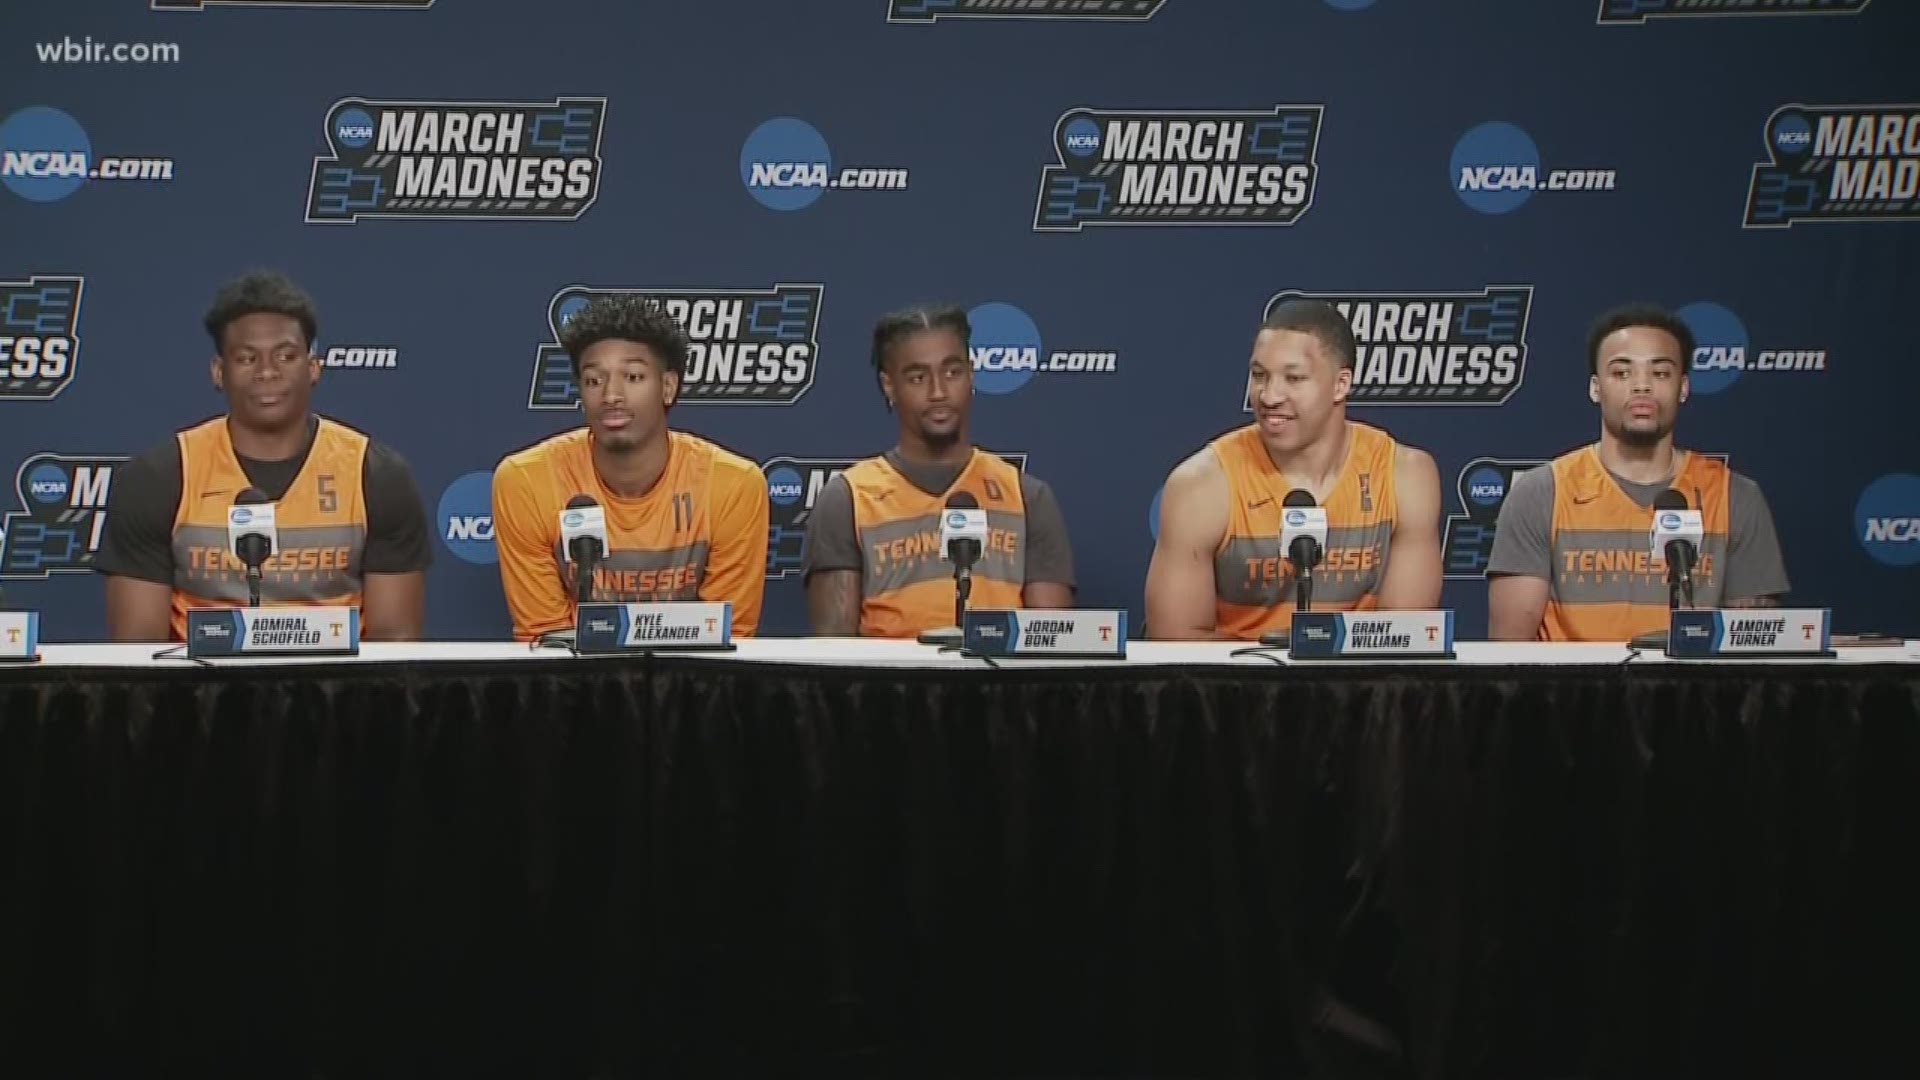 The Vols are ready to win in Columbus and the team is talking ahead of the team's first practice today.